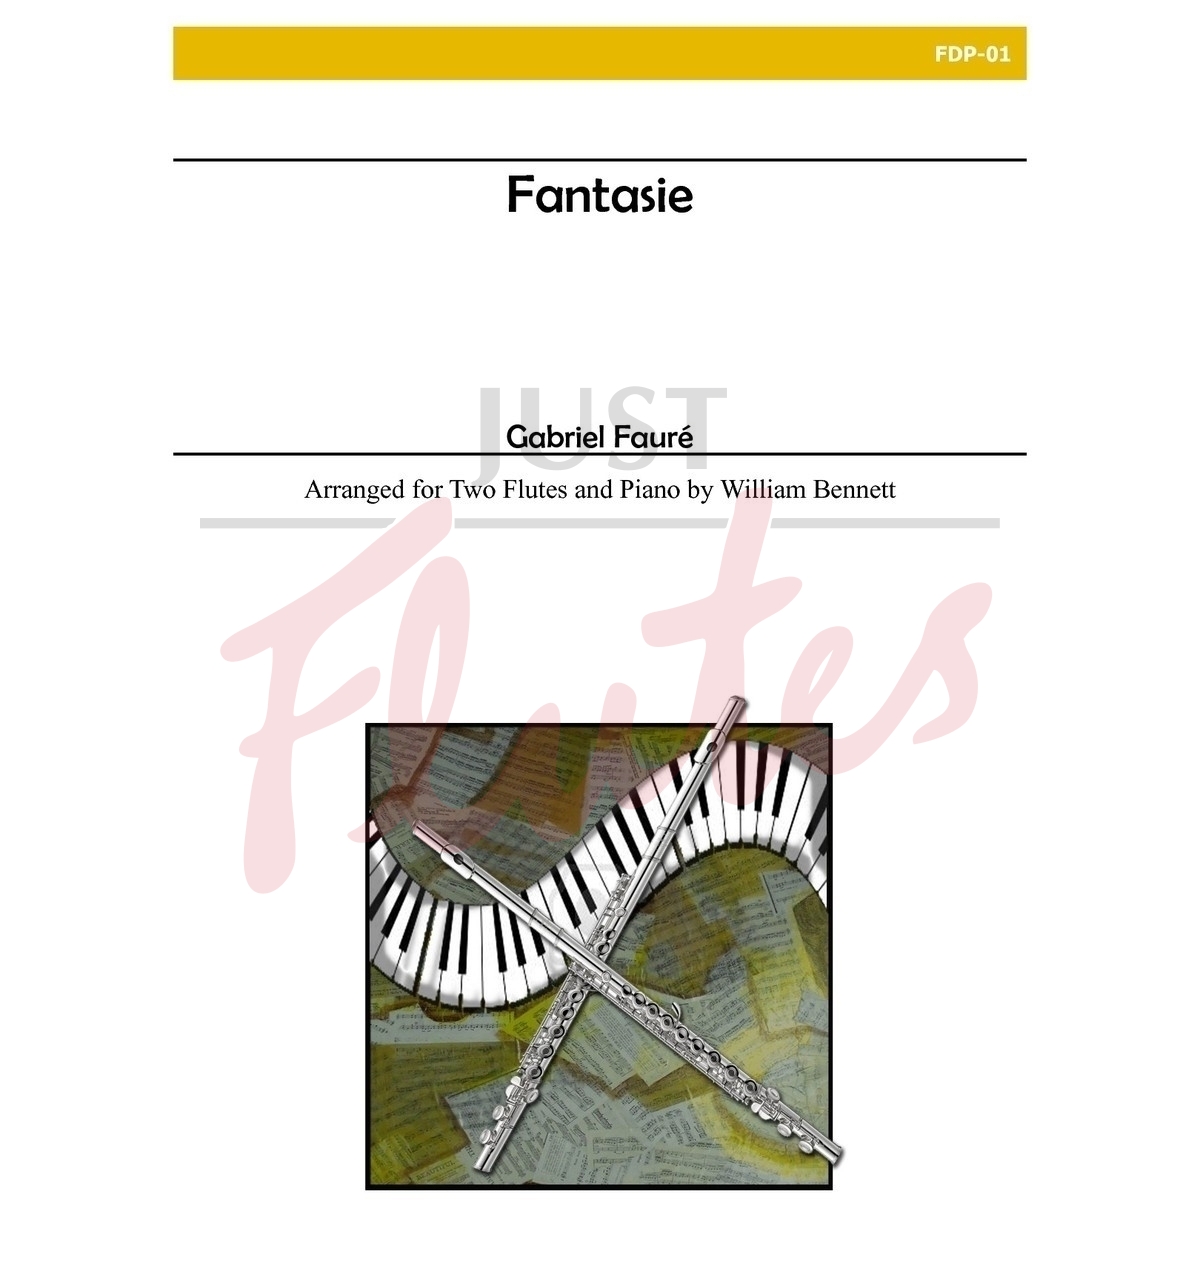 Fantasie for Two Flutes and Piano